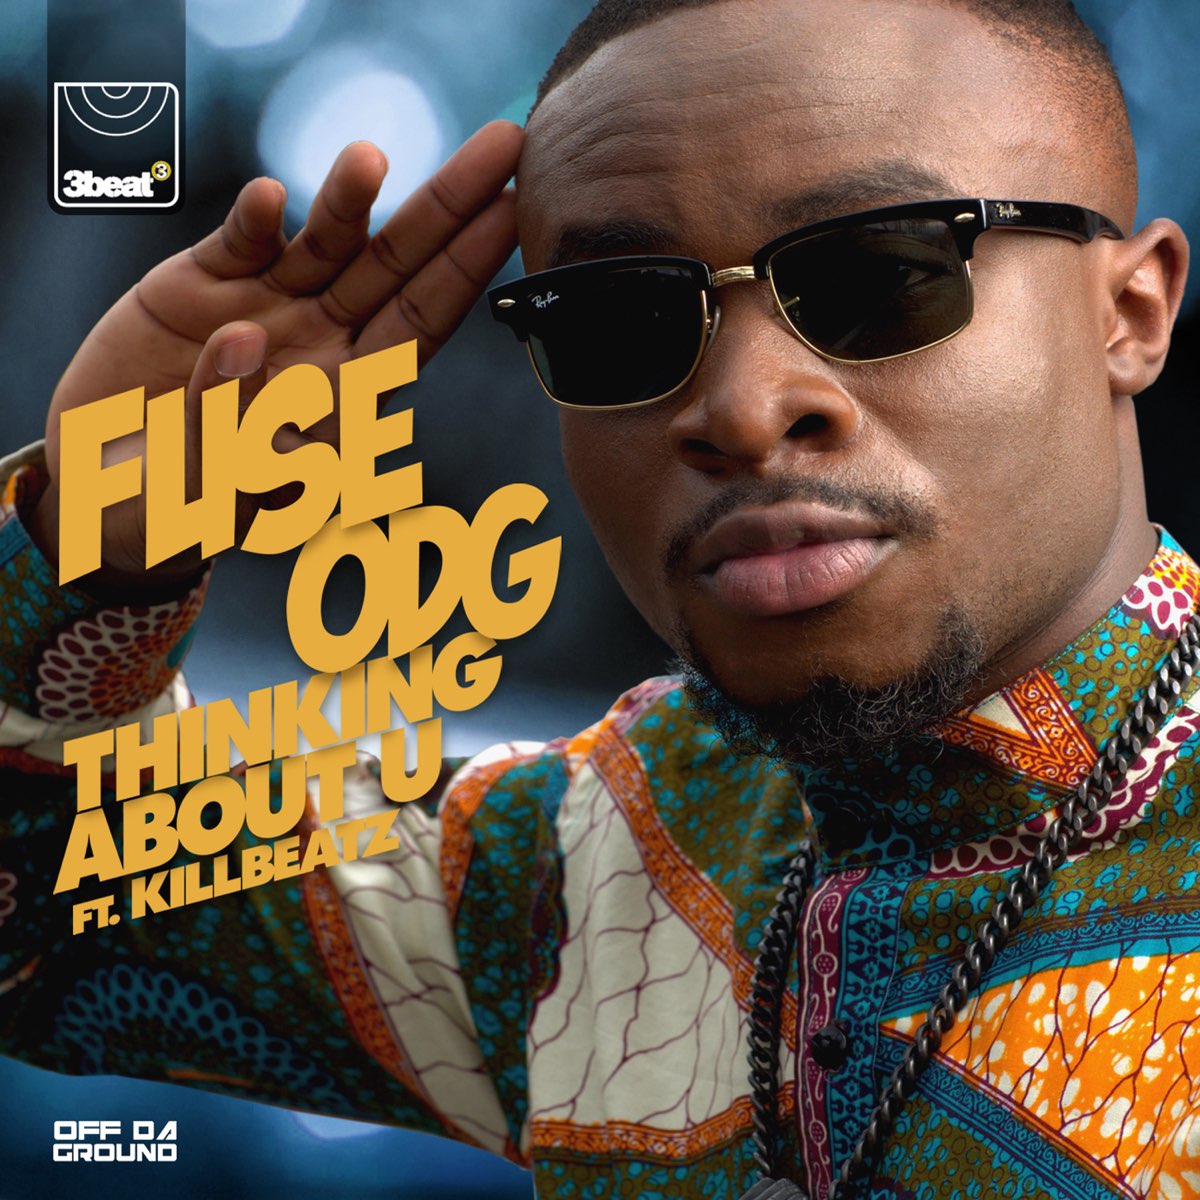 Fuse ODG ft. featuring Killbeatz Thinking About U cover artwork